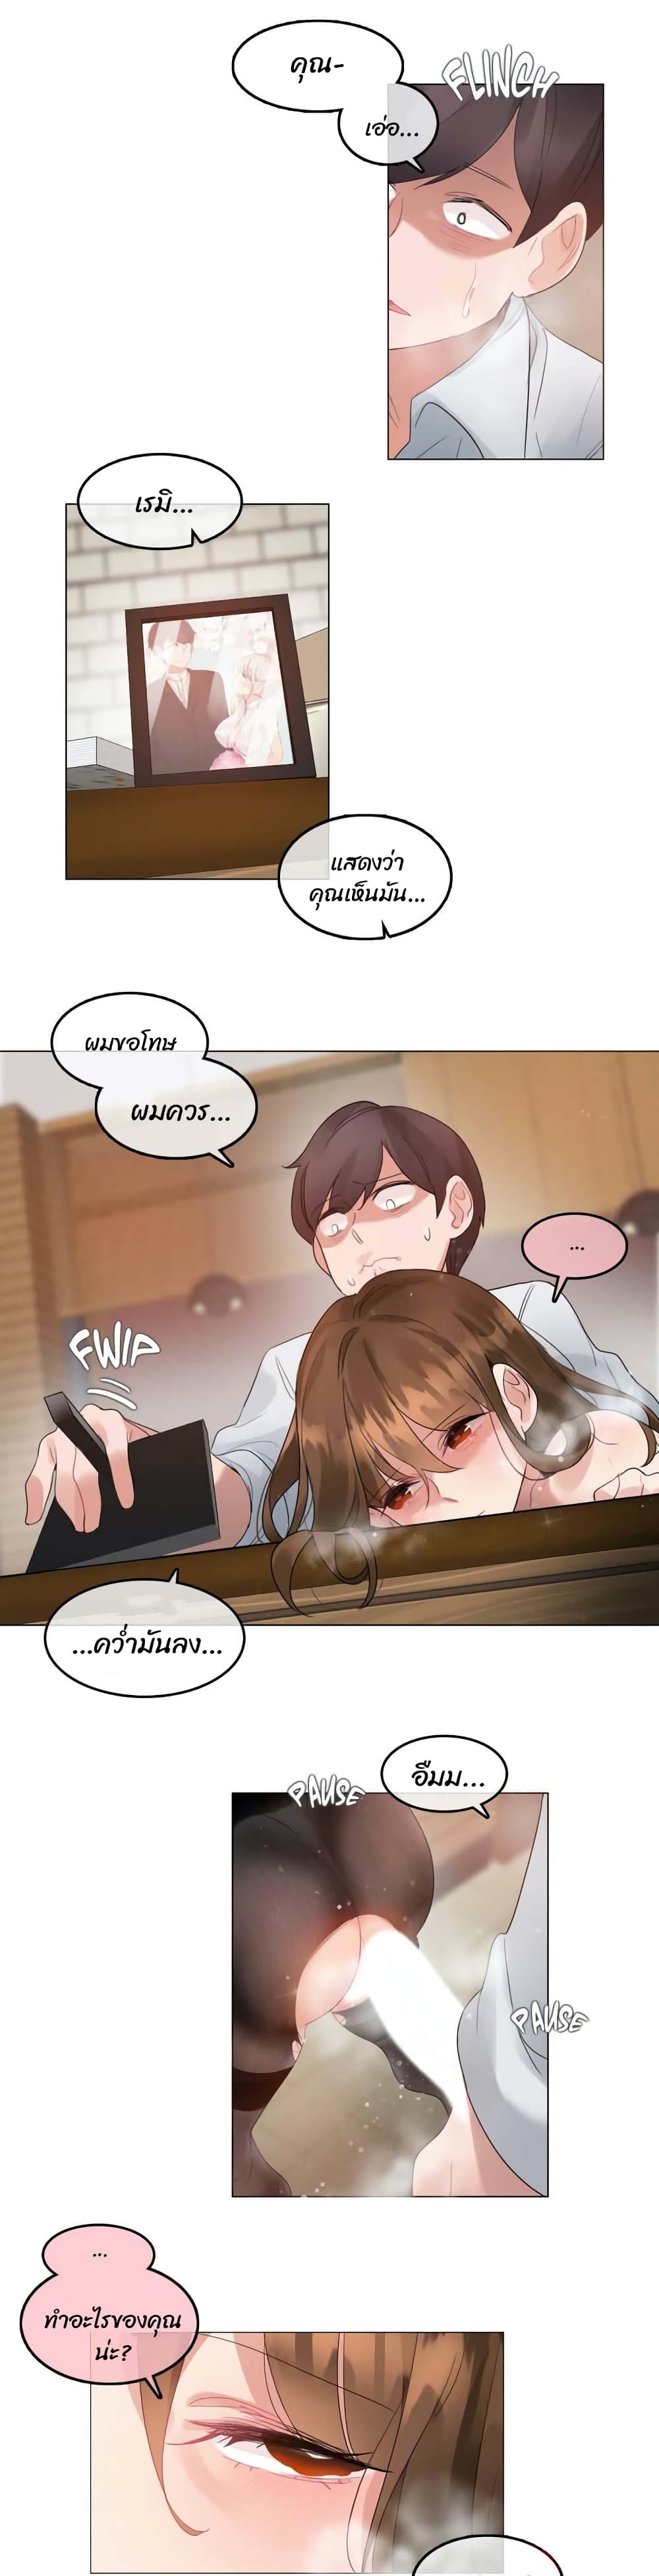 A Pervert's Daily Life 91 (7)